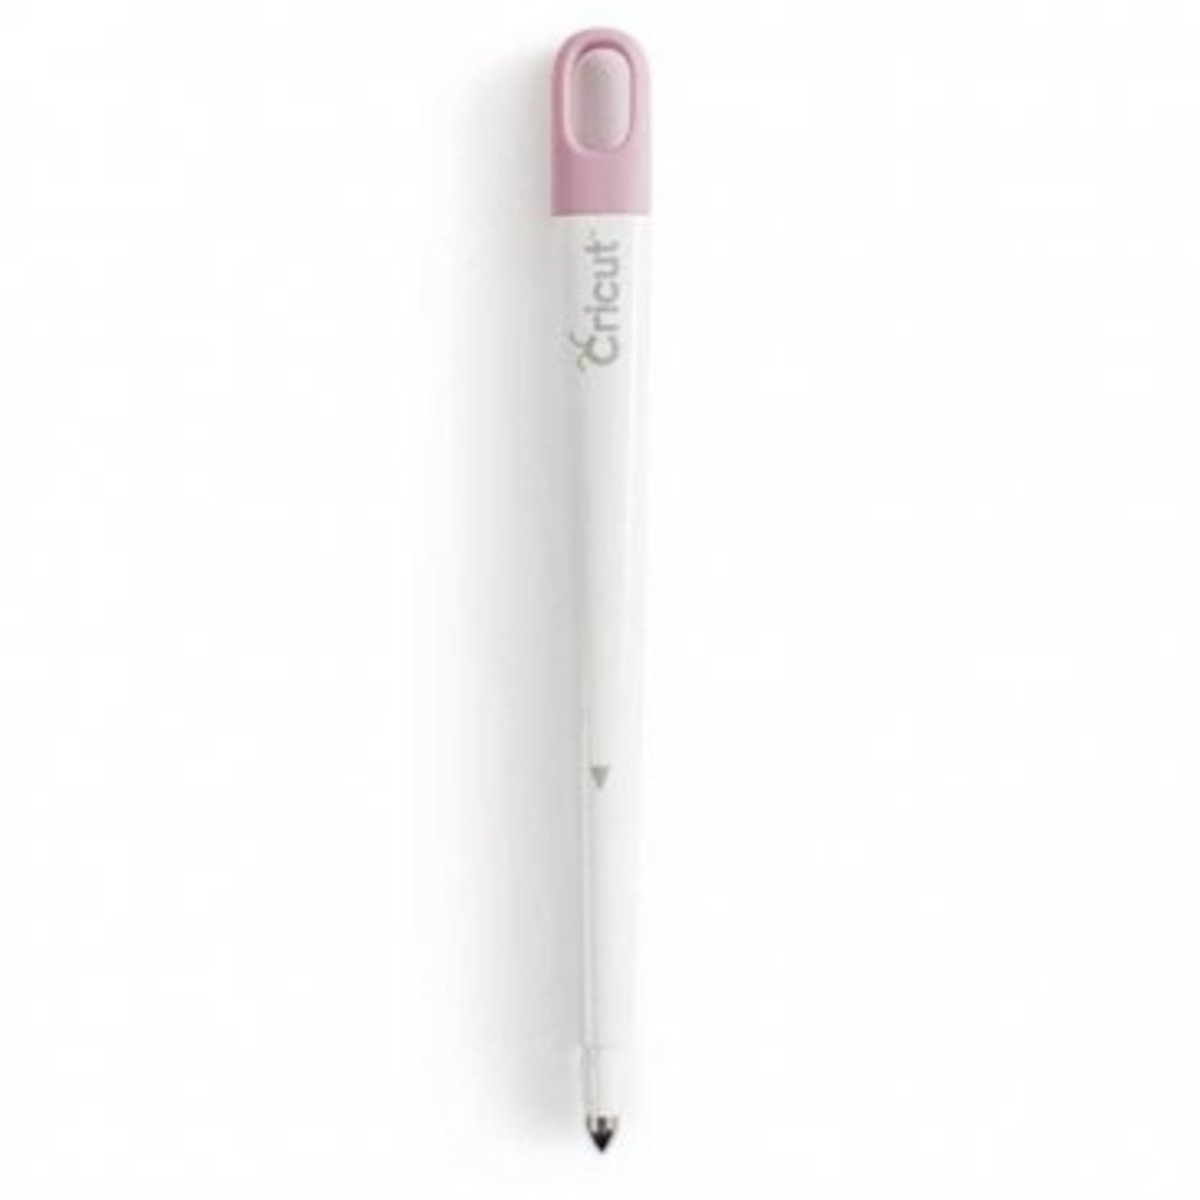 The Scoring Stylus is available for all Cricut cutting machines